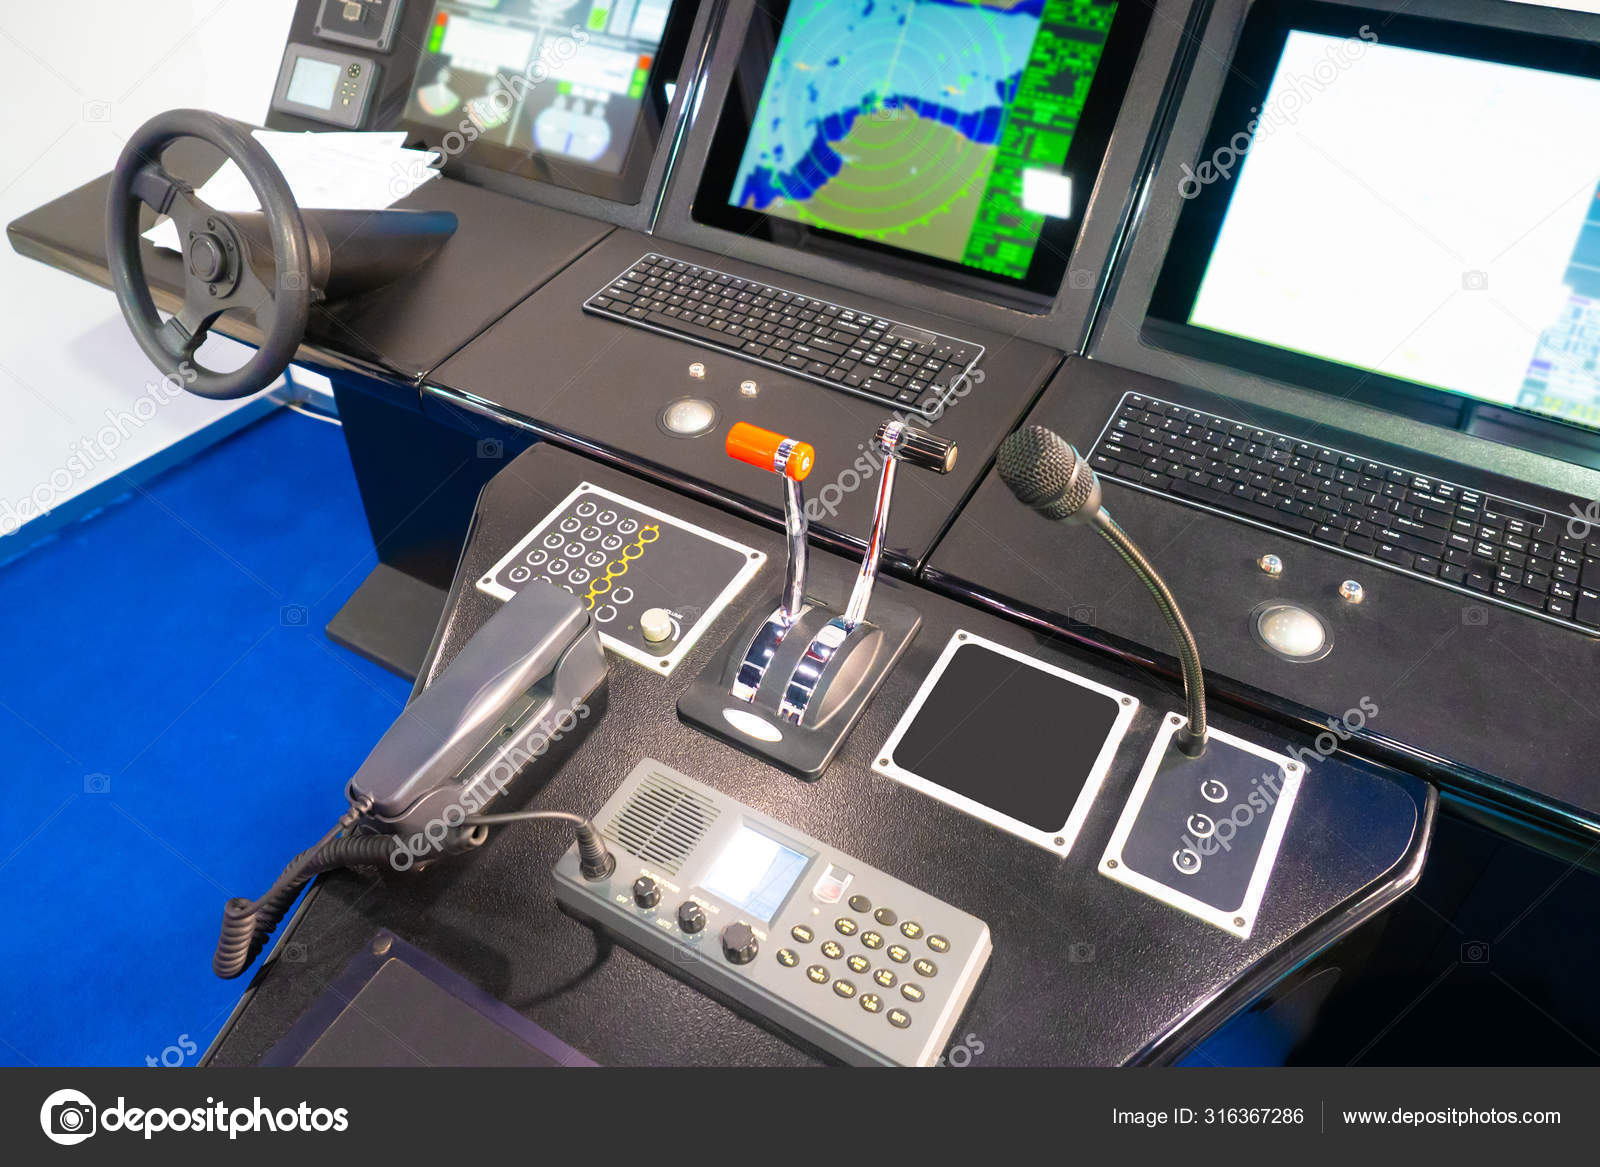 The Captain Bridge Of The Ship Equipment To Control The Vehicle Simulator For Sailors Navigational Instruments On The Captain Bridge Ship Control Stock Photo Image By C Grinphoto 316367286